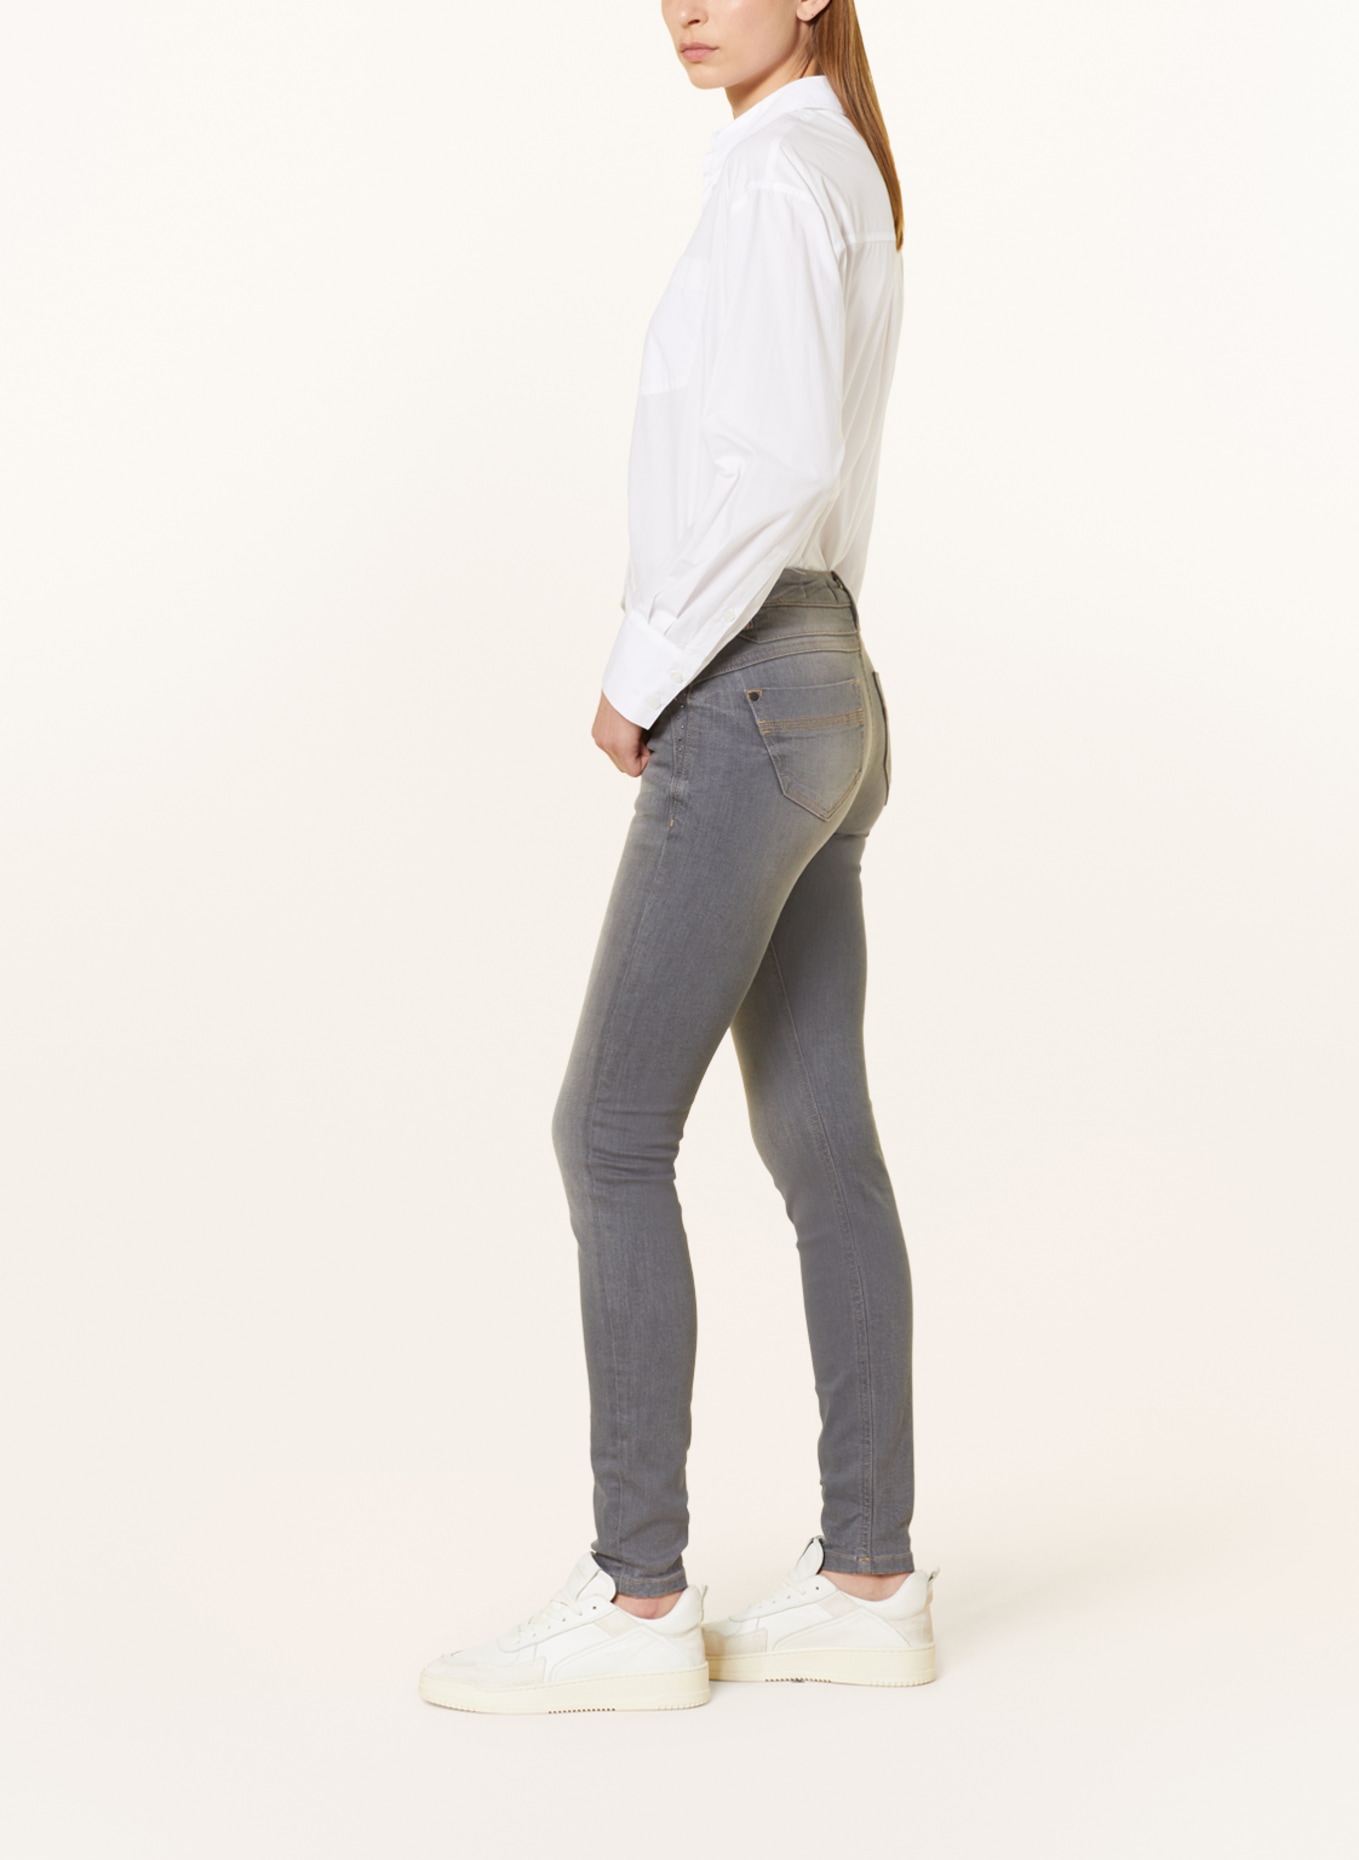 GANG Skinny Jeans NELE with decorative gems, Color: 7996 stared grey washed (Image 4)